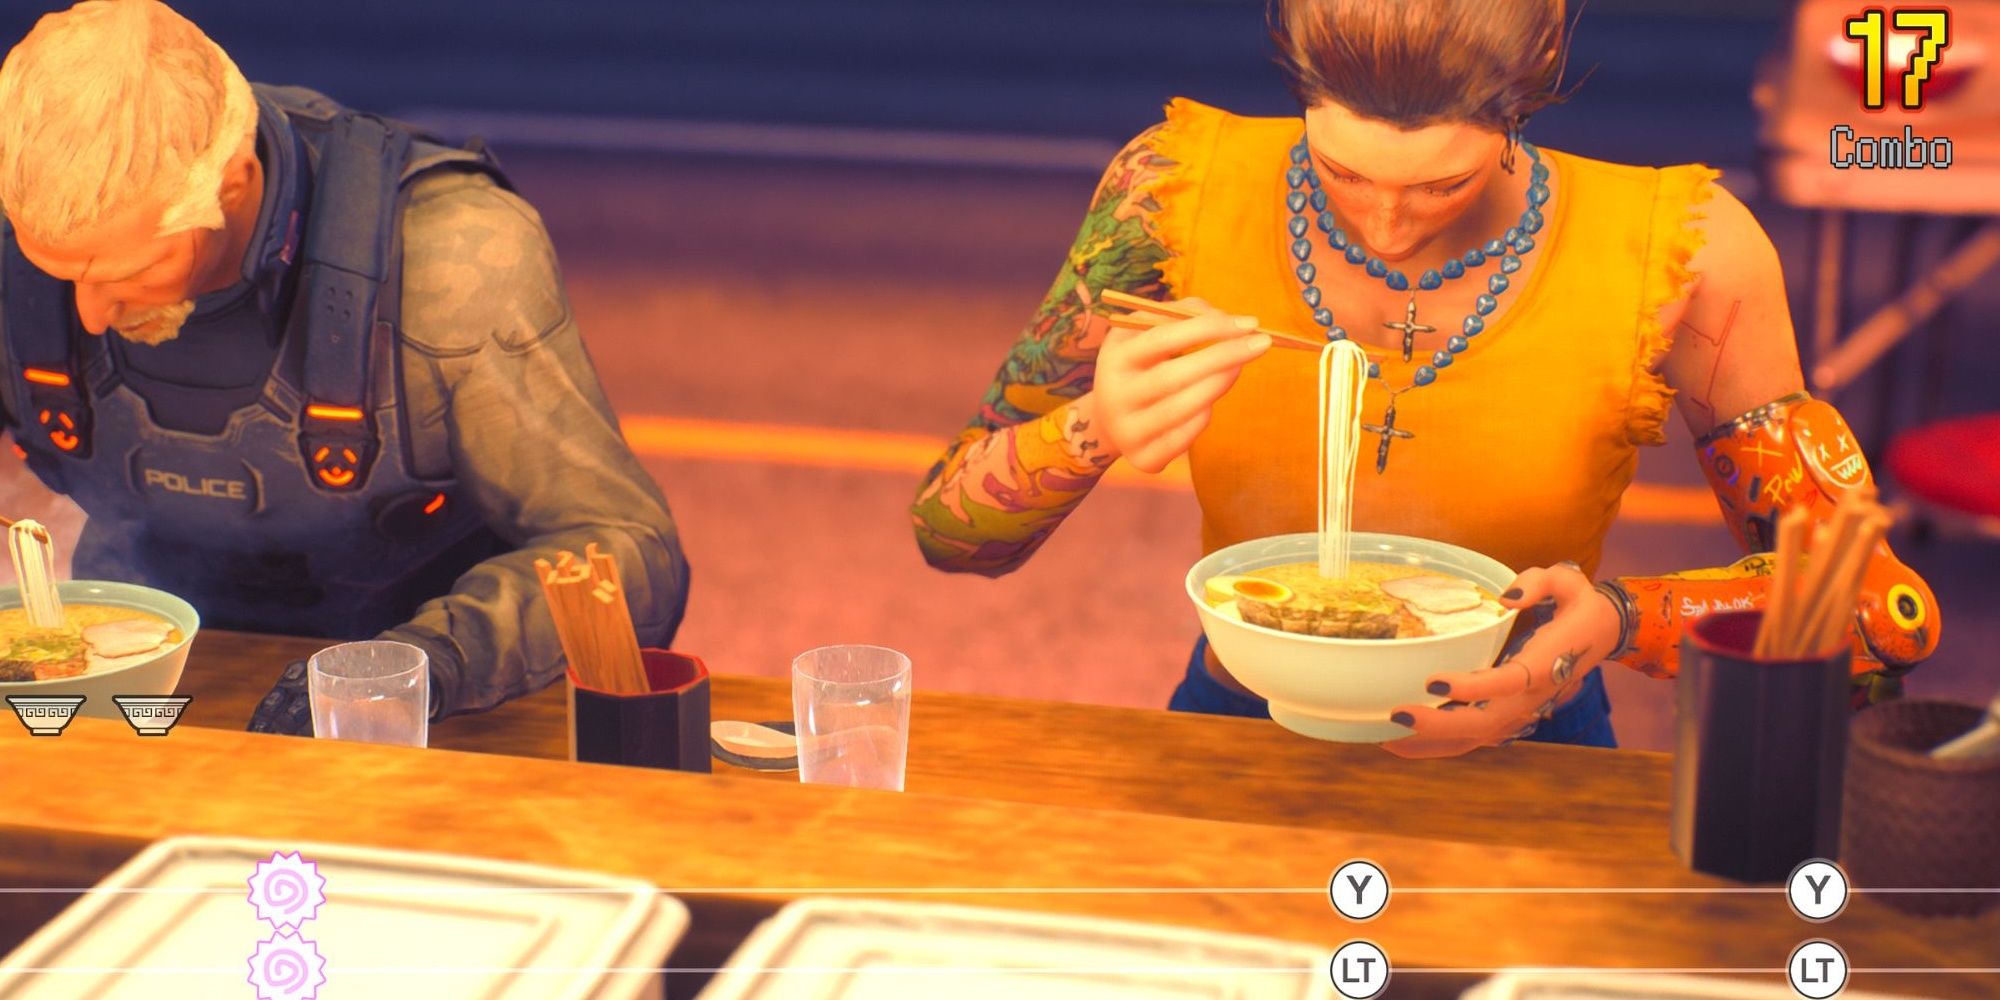 A rhythm minigame in Wanted: Dead where the protagonist and a cop are eating ramen in time to some music with a combo meter in the corner of the screen.